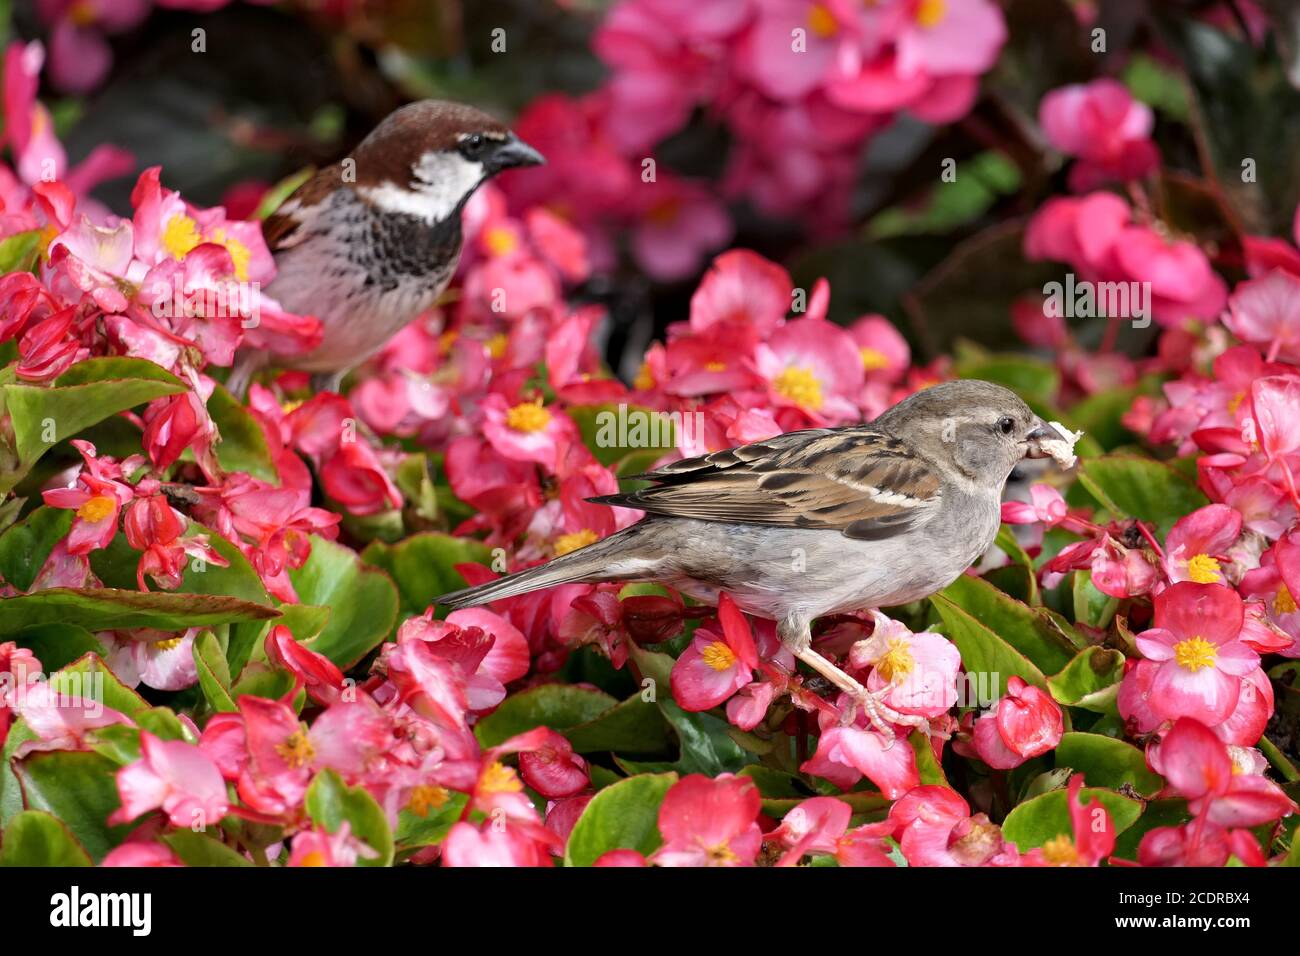 Closeup cute male and female house sparrow or passer domesticus perched on pink flowers in a garden Stock Photo